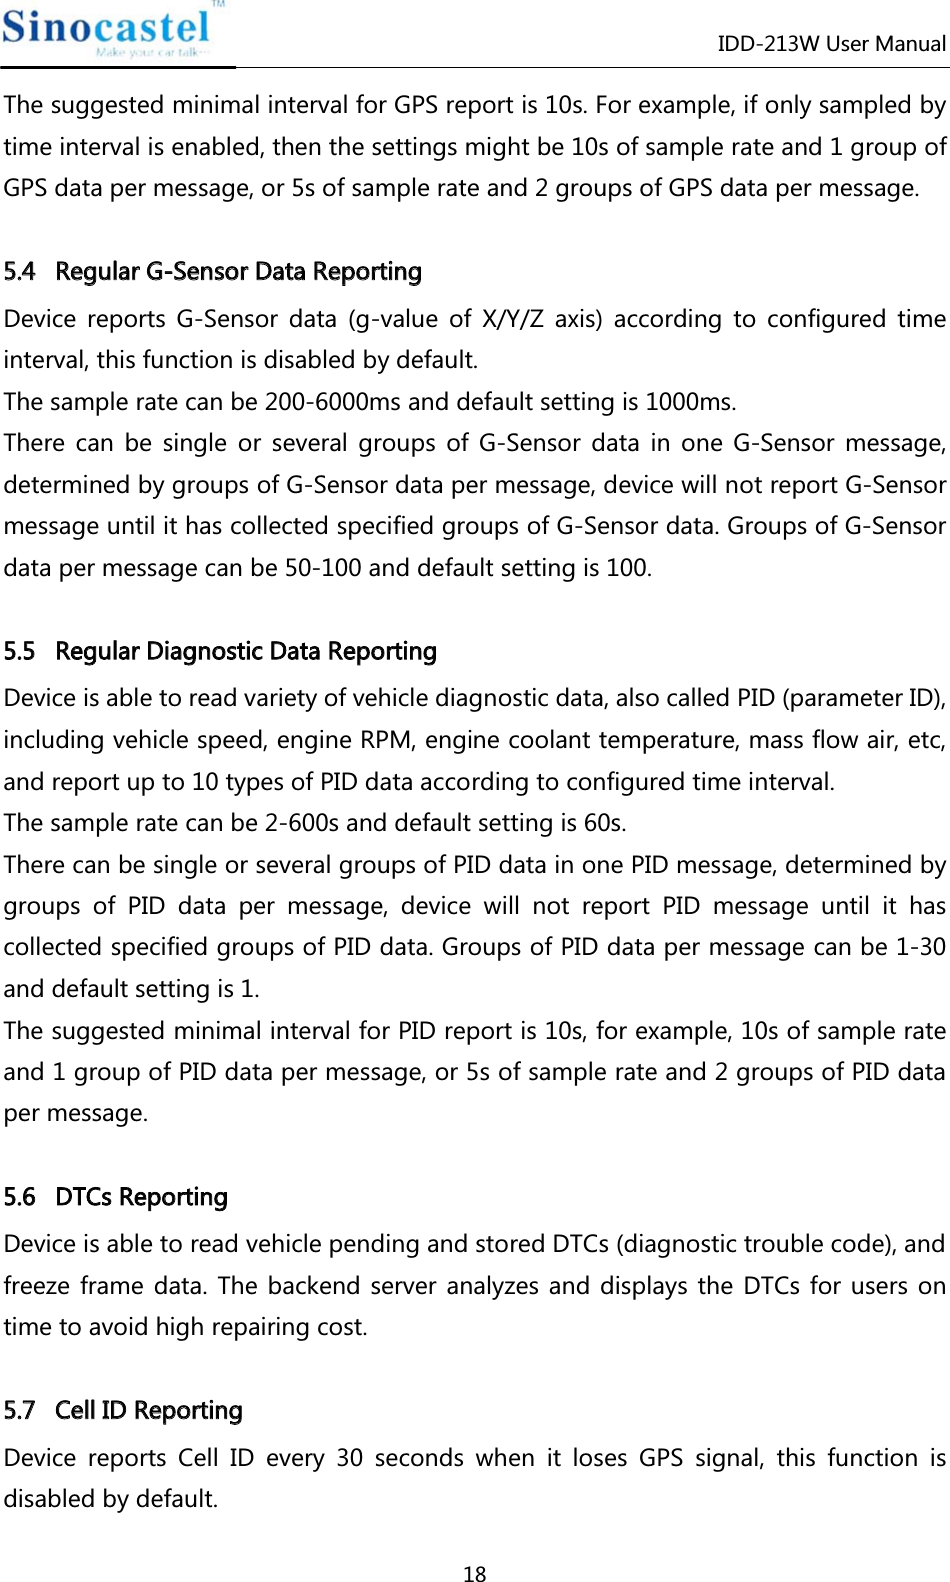 IDD-213W User Manual 18 The suggested minimal interval for GPS report is 10s. For example, if only sampled by time interval is enabled, then the settings might be 10s of sample rate and 1 group of GPS data per message, or 5s of sample rate and 2 groups of GPS data per message.  55..44   RReegguullaarr  GG--SSeennssoorr  DDaattaa  RReeppoorrttiinngg  Device reports G-Sensor data (g-value of X/Y/Z axis) according to configured time interval, this function is disabled by default. The sample rate can be 200-6000ms and default setting is 1000ms. There can be single or several groups of G-Sensor data in one G-Sensor message, determined by groups of G-Sensor data per message, device will not report G-Sensor message until it has collected specified groups of G-Sensor data. Groups of G-Sensor data per message can be 50-100 and default setting is 100.  55..55   RReegguullaarr  DDiiaaggnnoossttiicc  DDaattaa  RReeppoorrttiinngg  Device is able to read variety of vehicle diagnostic data, also called PID (parameter ID), including vehicle speed, engine RPM, engine coolant temperature, mass flow air, etc, and report up to 10 types of PID data according to configured time interval.   The sample rate can be 2-600s and default setting is 60s. There can be single or several groups of PID data in one PID message, determined by groups of PID data per message, device will not report PID message until it has collected specified groups of PID data. Groups of PID data per message can be 1-30 and default setting is 1. The suggested minimal interval for PID report is 10s, for example, 10s of sample rate and 1 group of PID data per message, or 5s of sample rate and 2 groups of PID data per message.  55..66   DDTTCCss  RReeppoorrttiinngg  Device is able to read vehicle pending and stored DTCs (diagnostic trouble code), and freeze frame data. The backend server analyzes and displays the DTCs for users on time to avoid high repairing cost.  55..77   CCeellll  IIDD  RReeppoorrttiinngg  Device reports Cell ID every 30 seconds when it loses GPS signal, this function is disabled by default. 